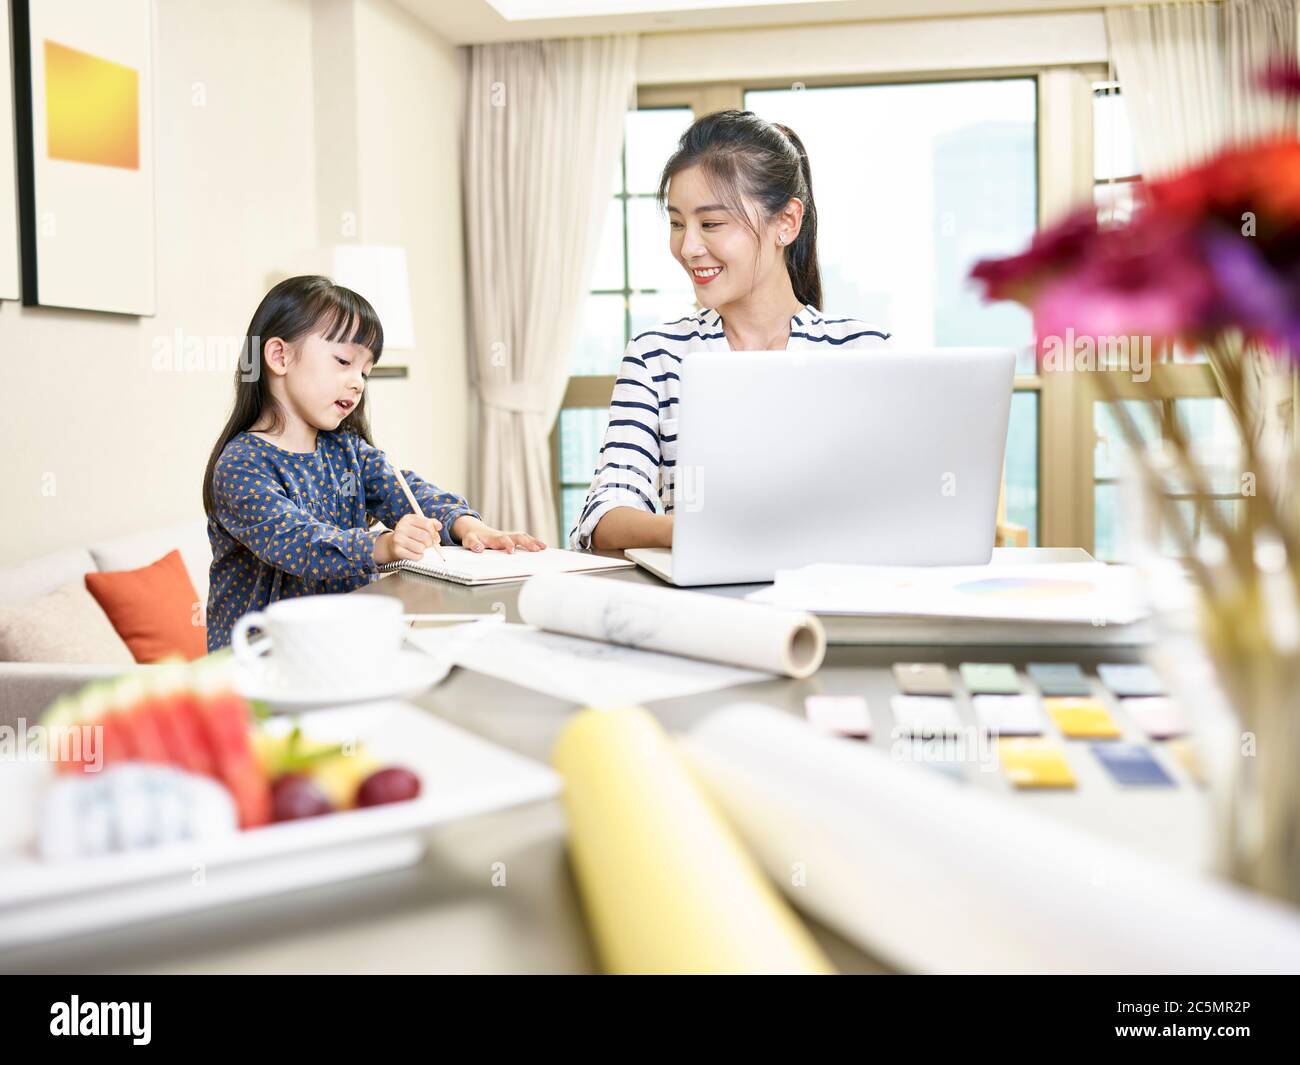 young asian designer mother working from home using laptop computer while taking care of daughter (artwork in background digitally altered) Stock Photo